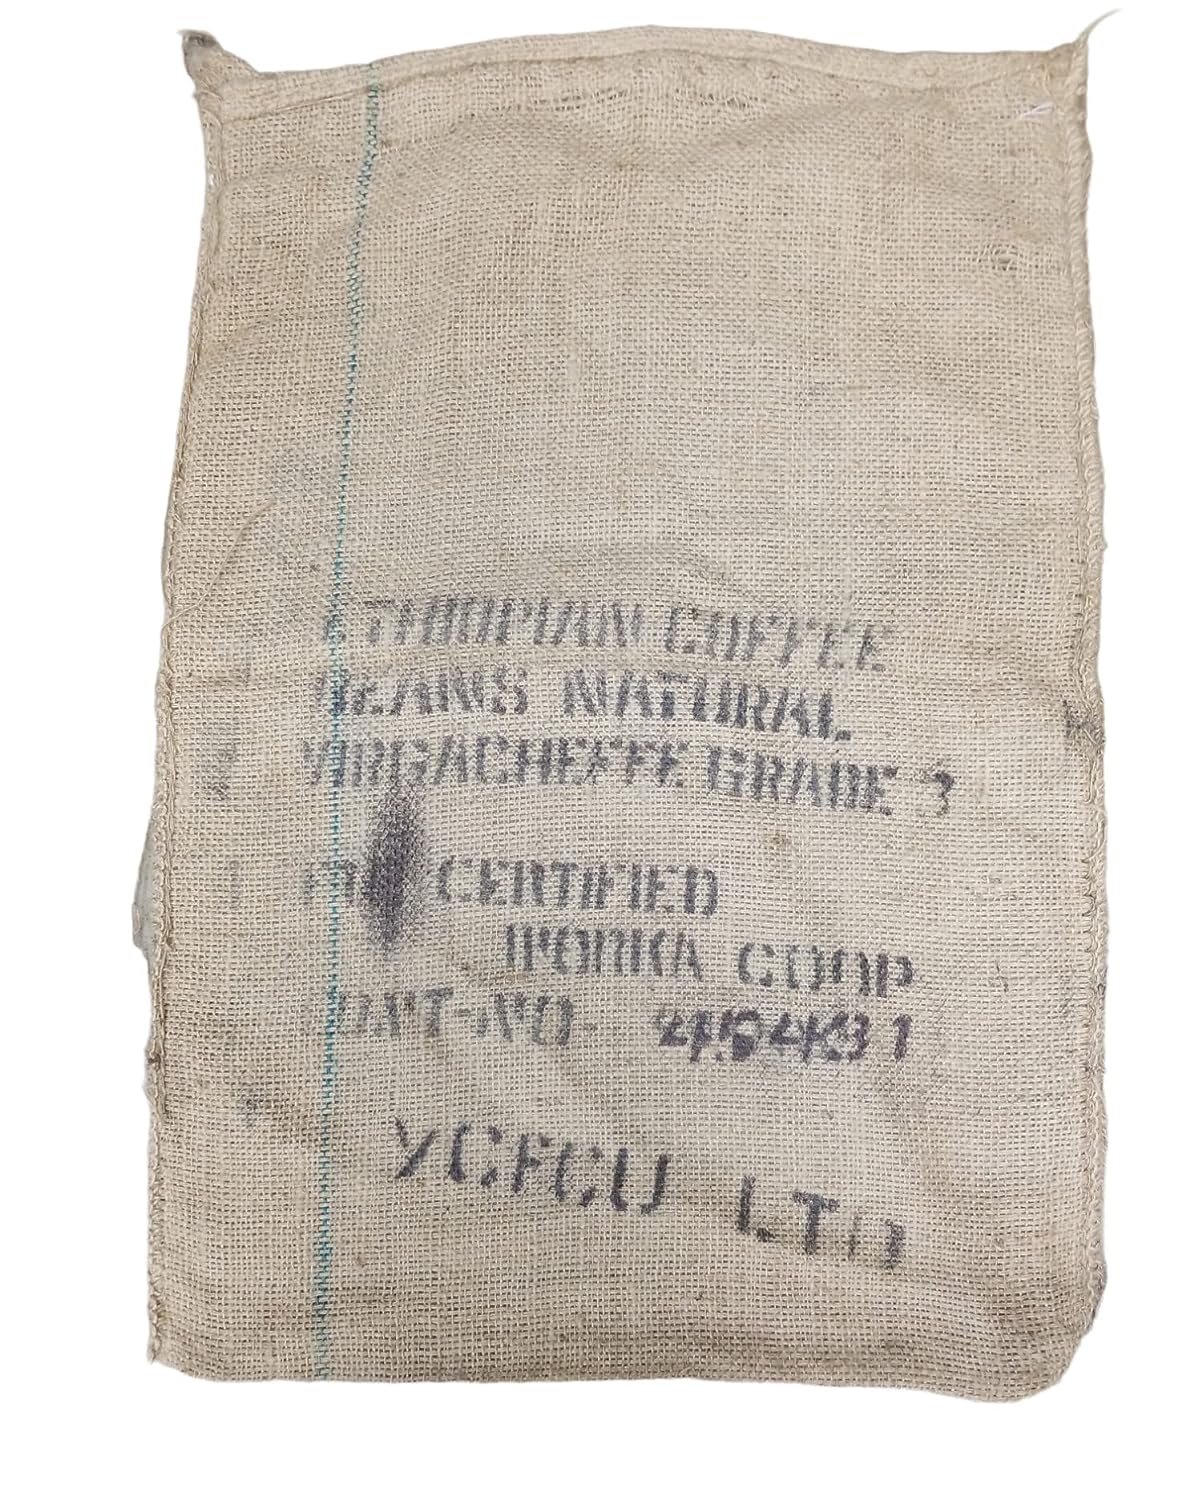 Martini Coffee Roasters - Authentic Used Burlap Coffee Bag From Ethiopia (Empty)